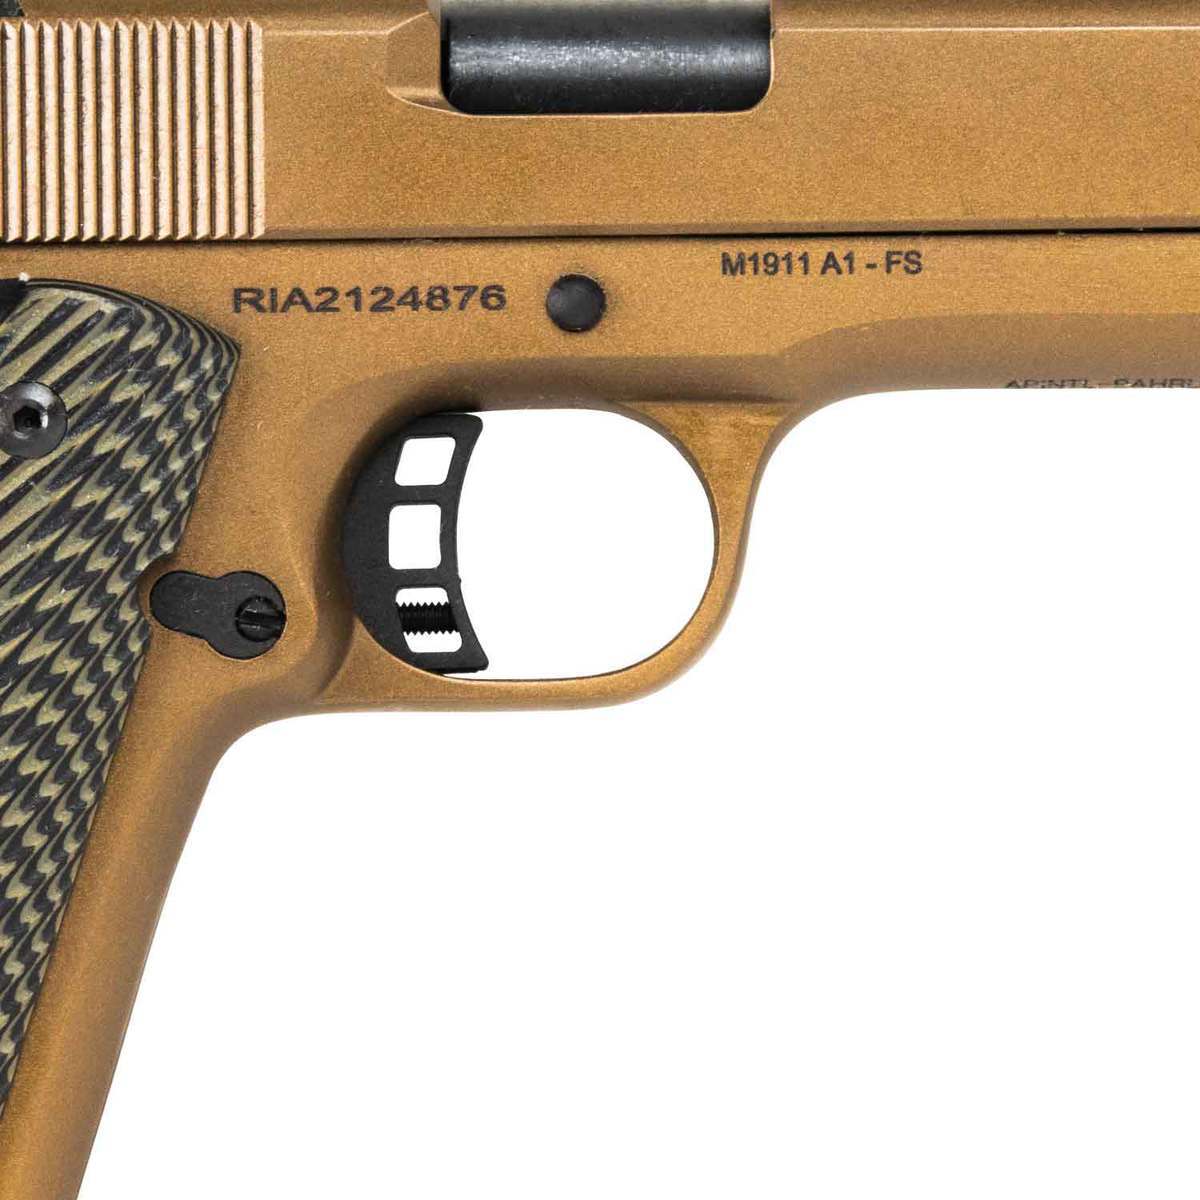 Rock Island Armory M1911 A1 Fs Tactical 45 Auto Acp 5in Burnt Bronzegreen Pistol 81 Rounds 1102